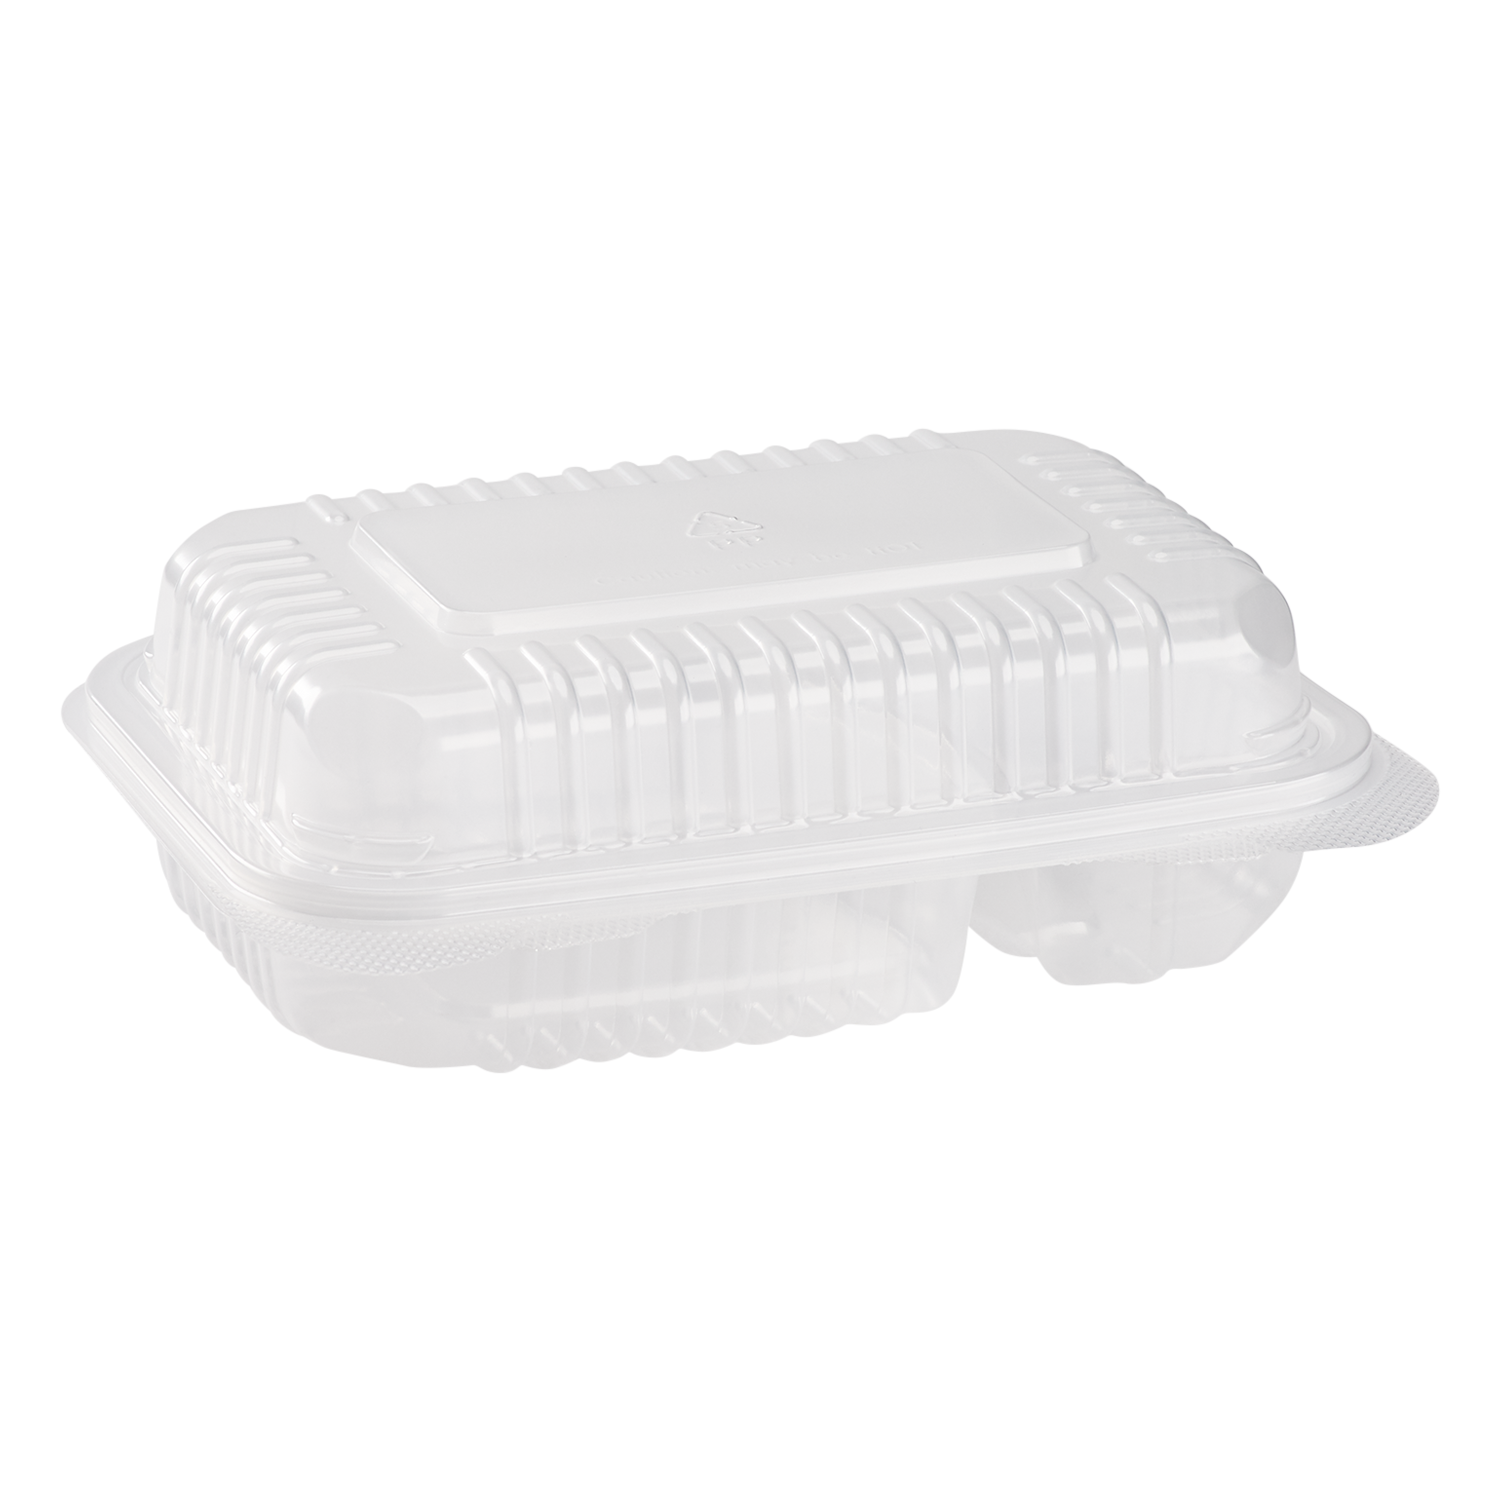 9''x9'' Hinged Takeout Boxes  Extra Large Clamshell Containers